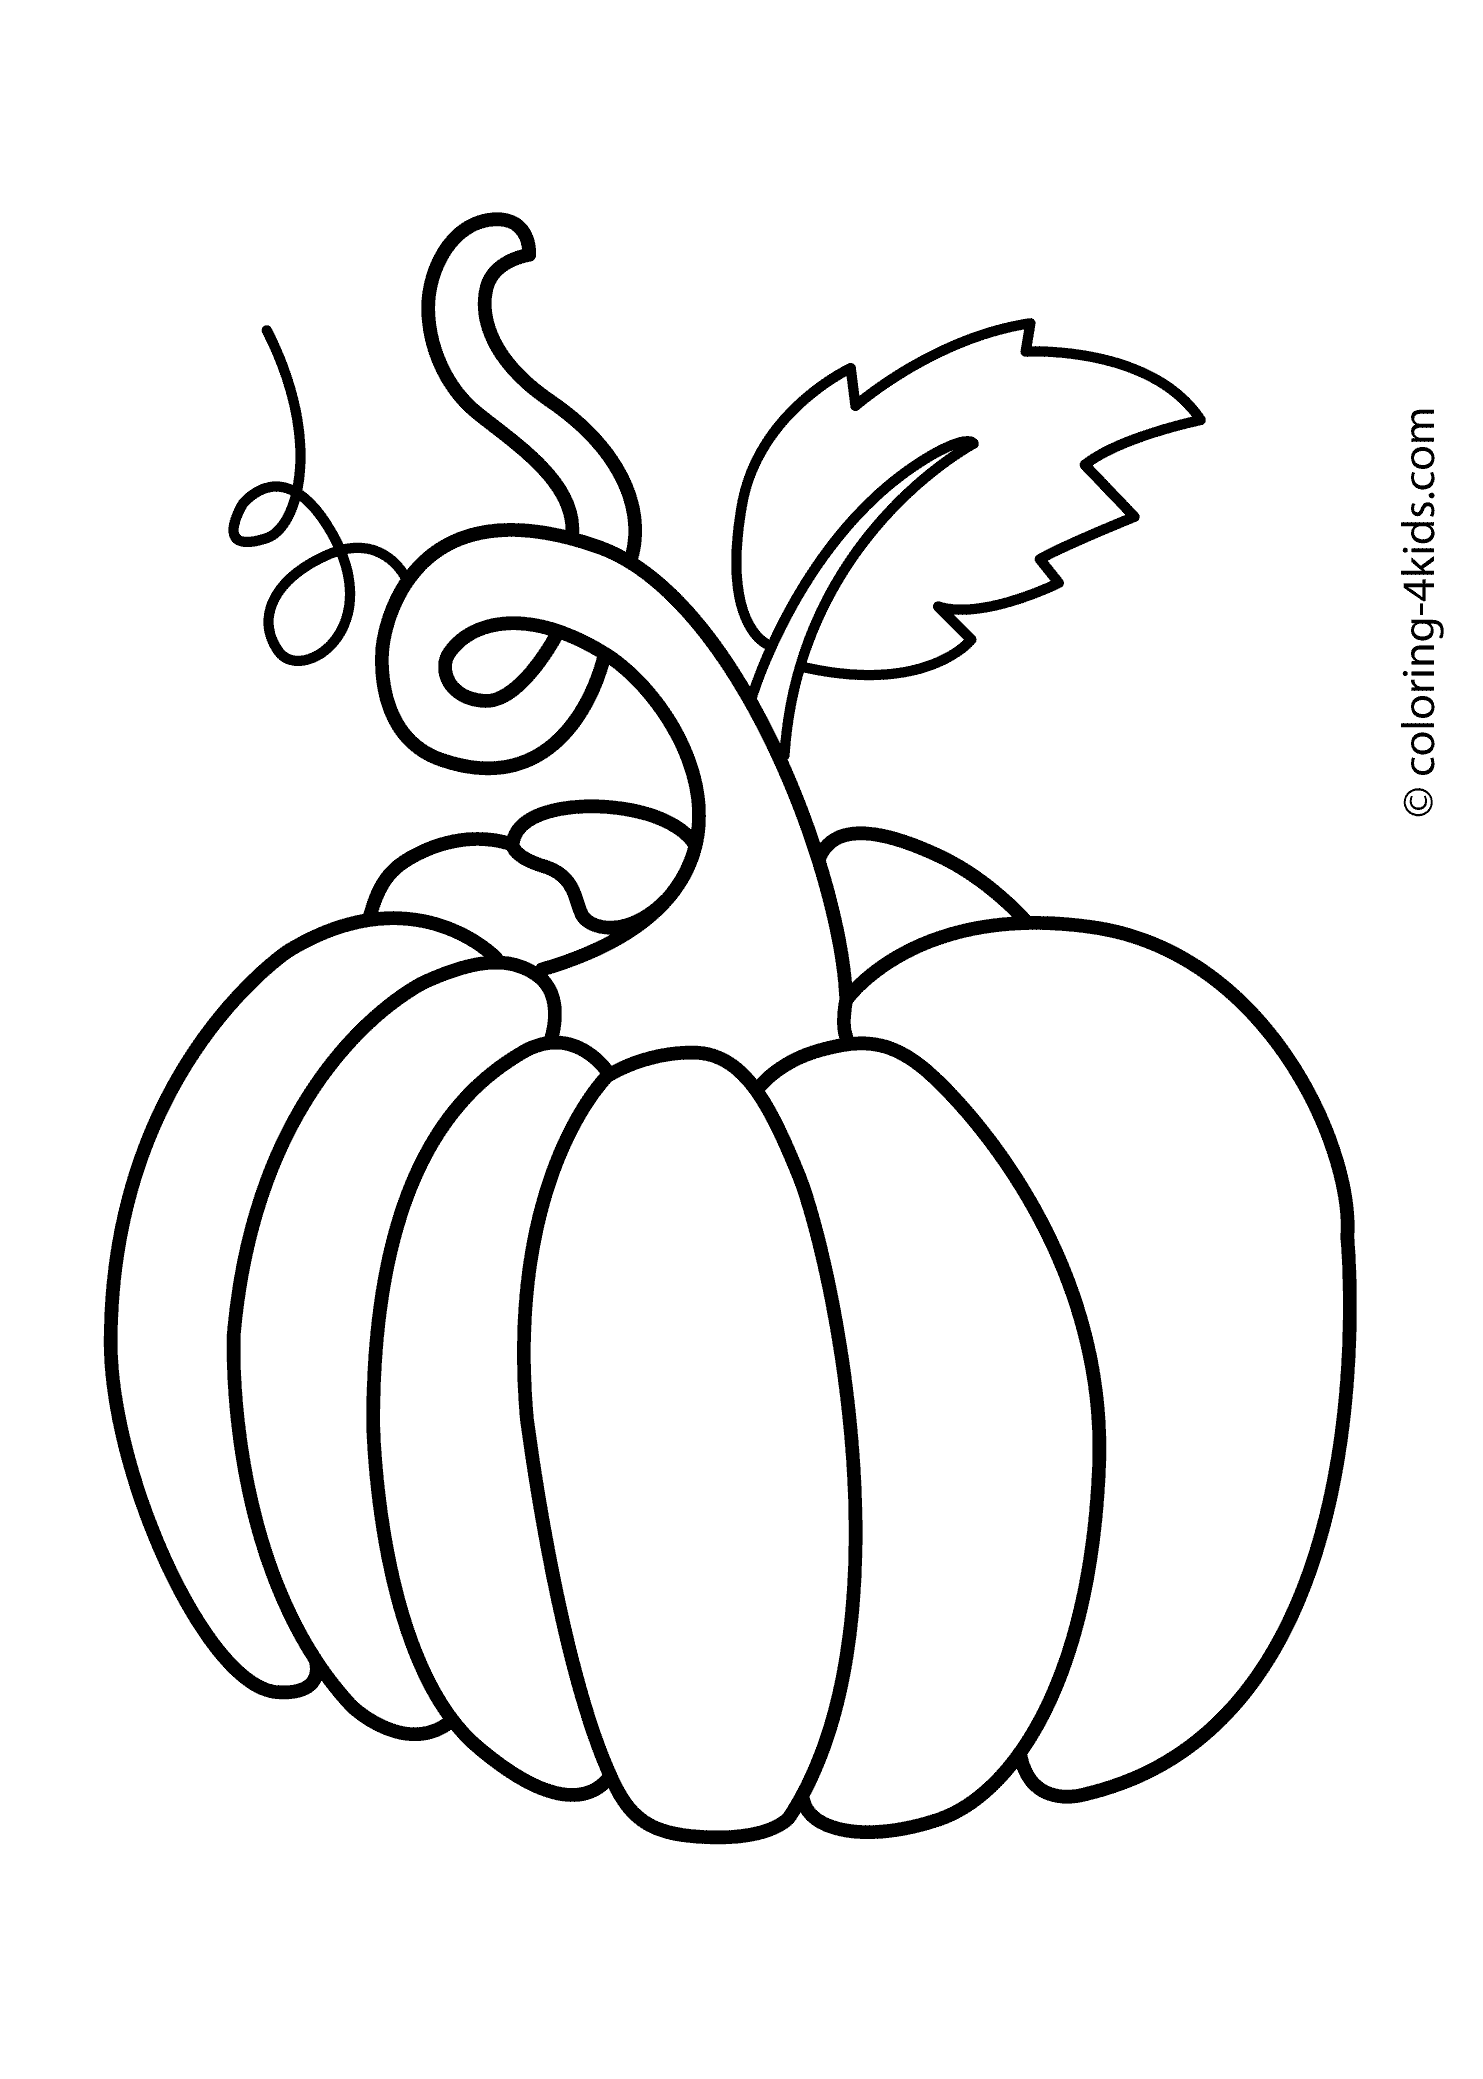 Pumpkin vegetable coloring page for kids, printable | coloing-